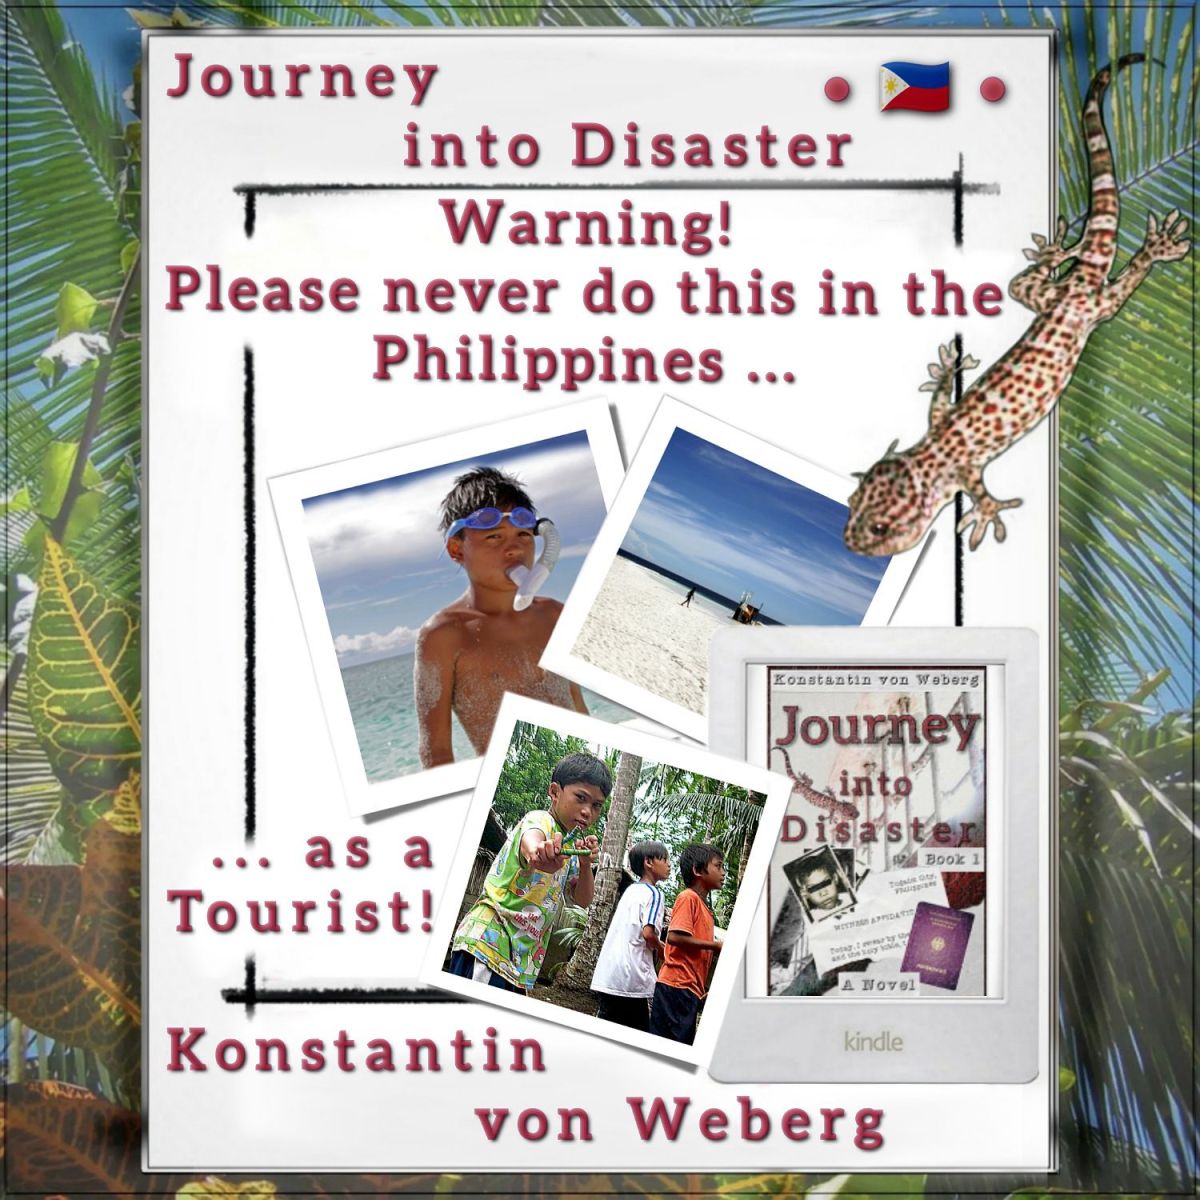 Warning! Never do this in the Philippines as a foreigner!